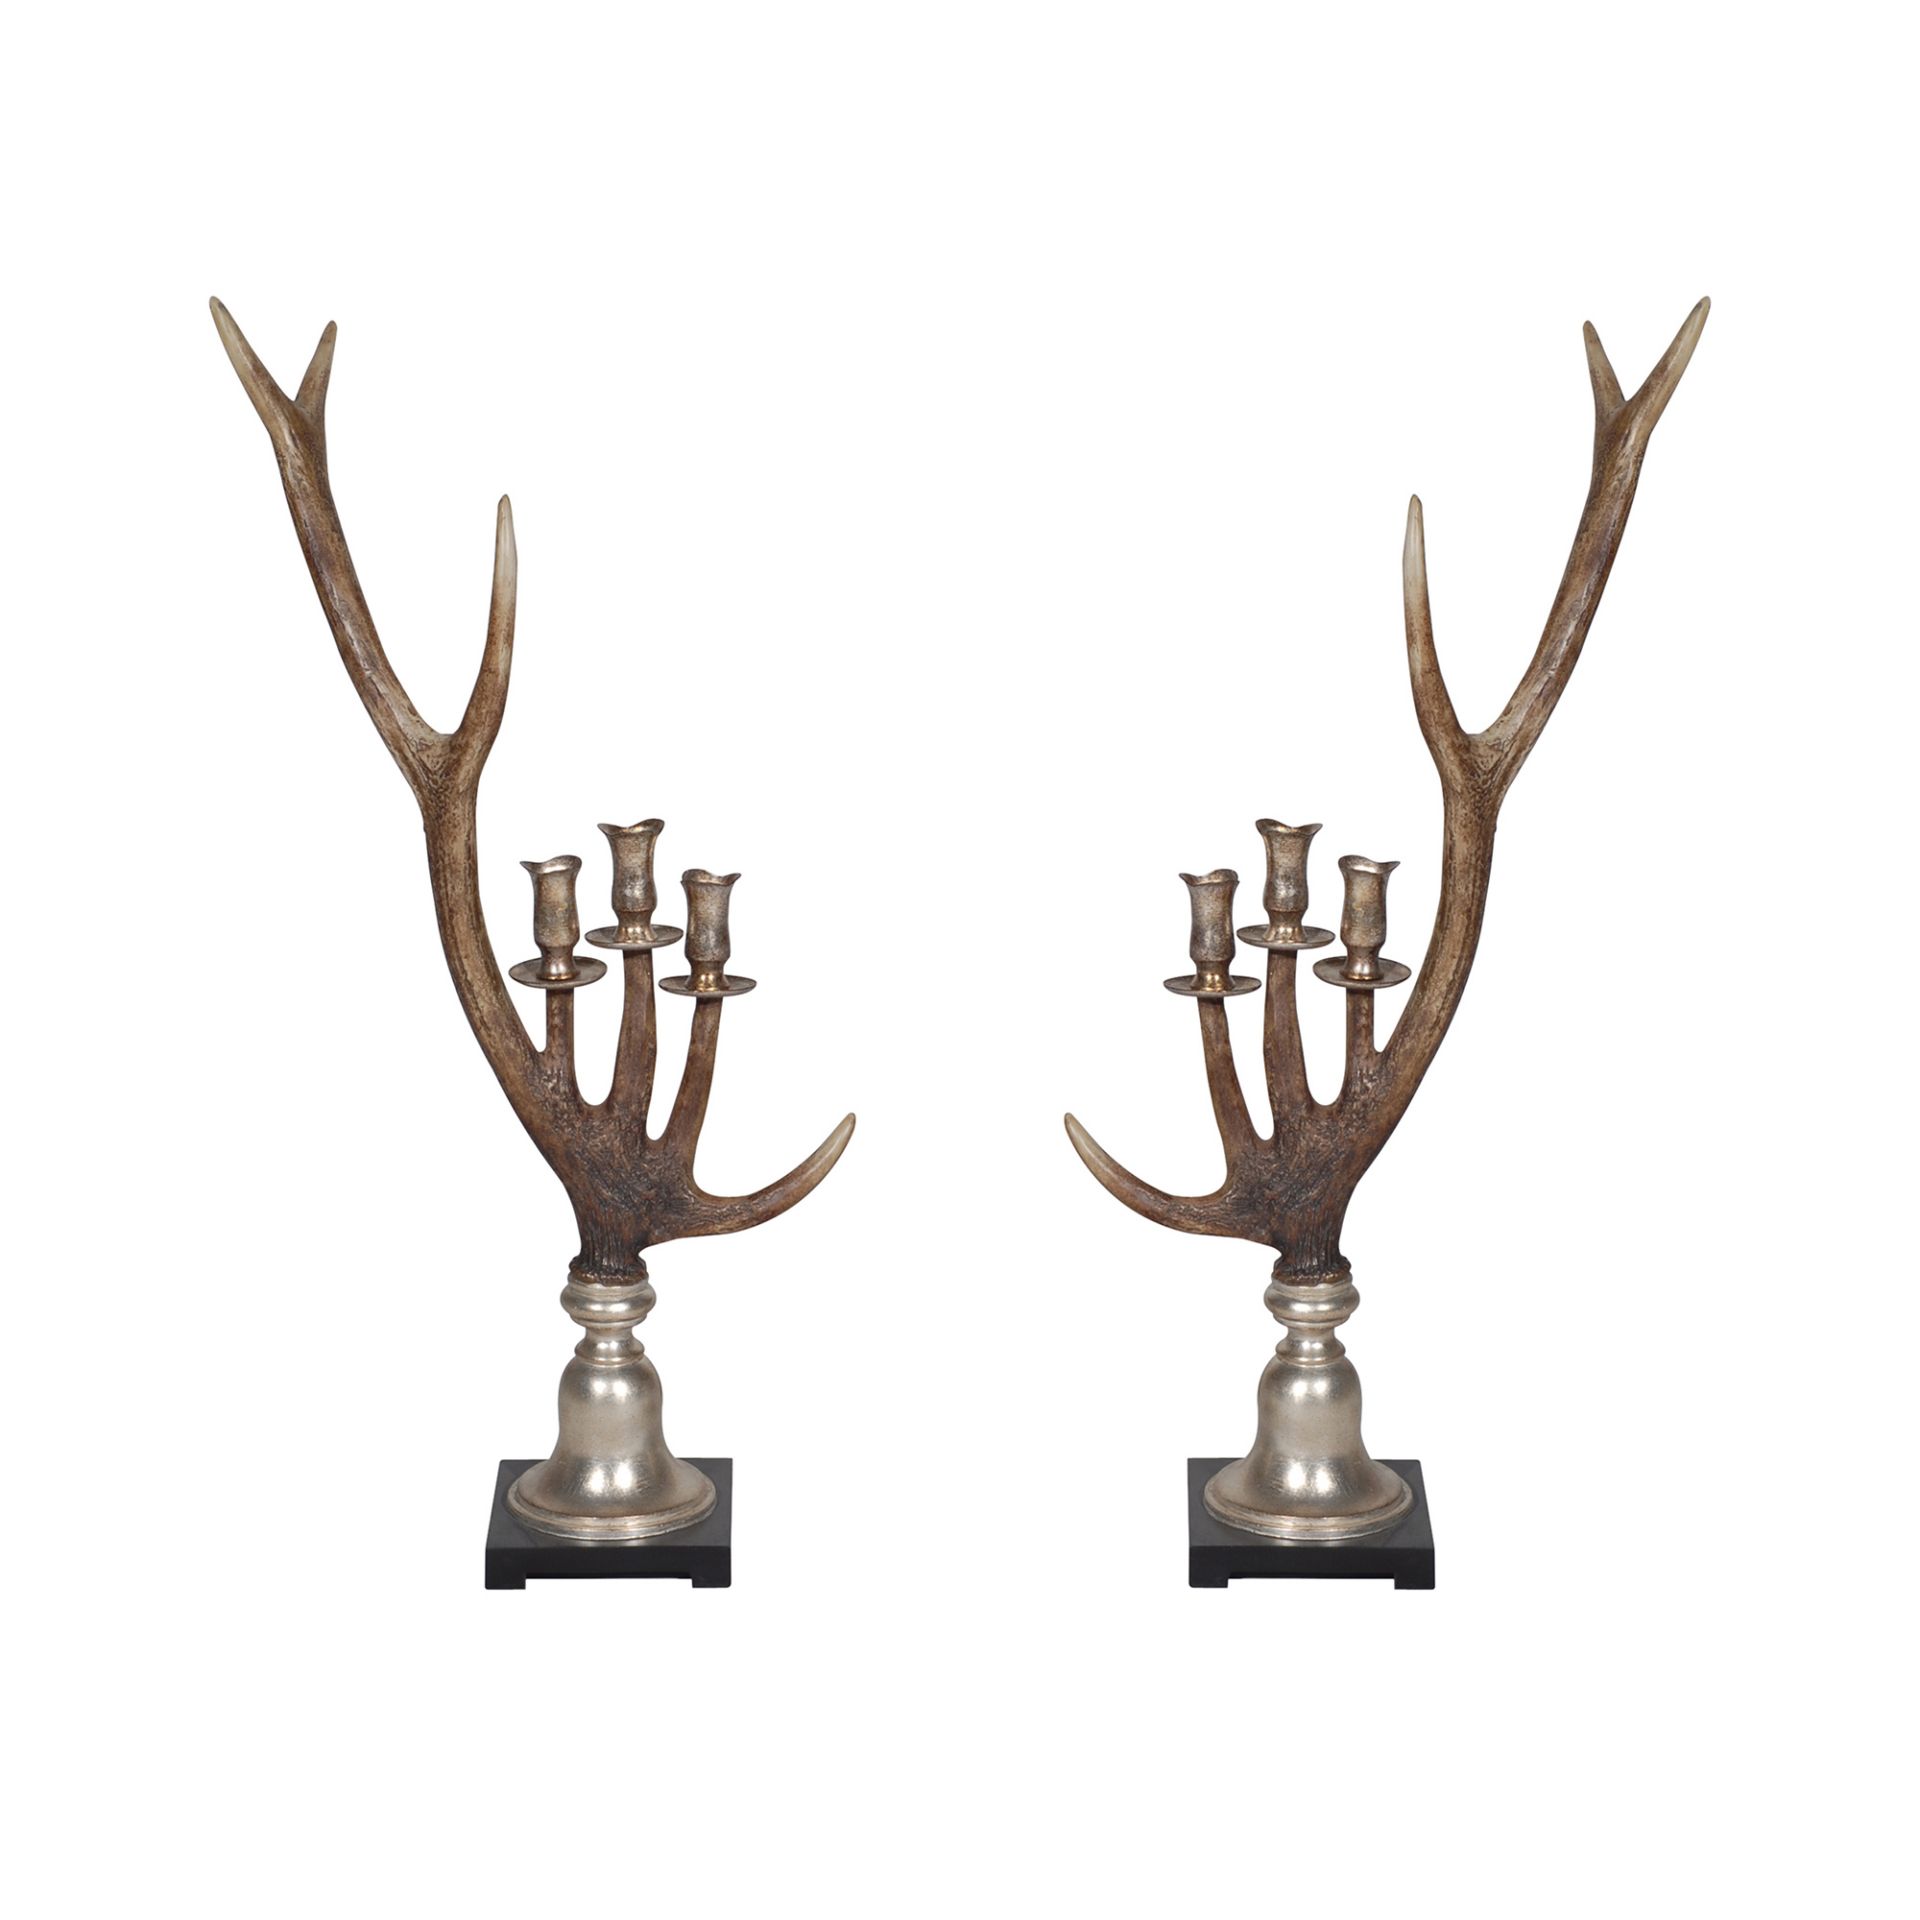 A Pair Antler Candle Holders Naturally Shed Antlers Have Been A Key Feature Of Hunting Lodges - Image 2 of 3